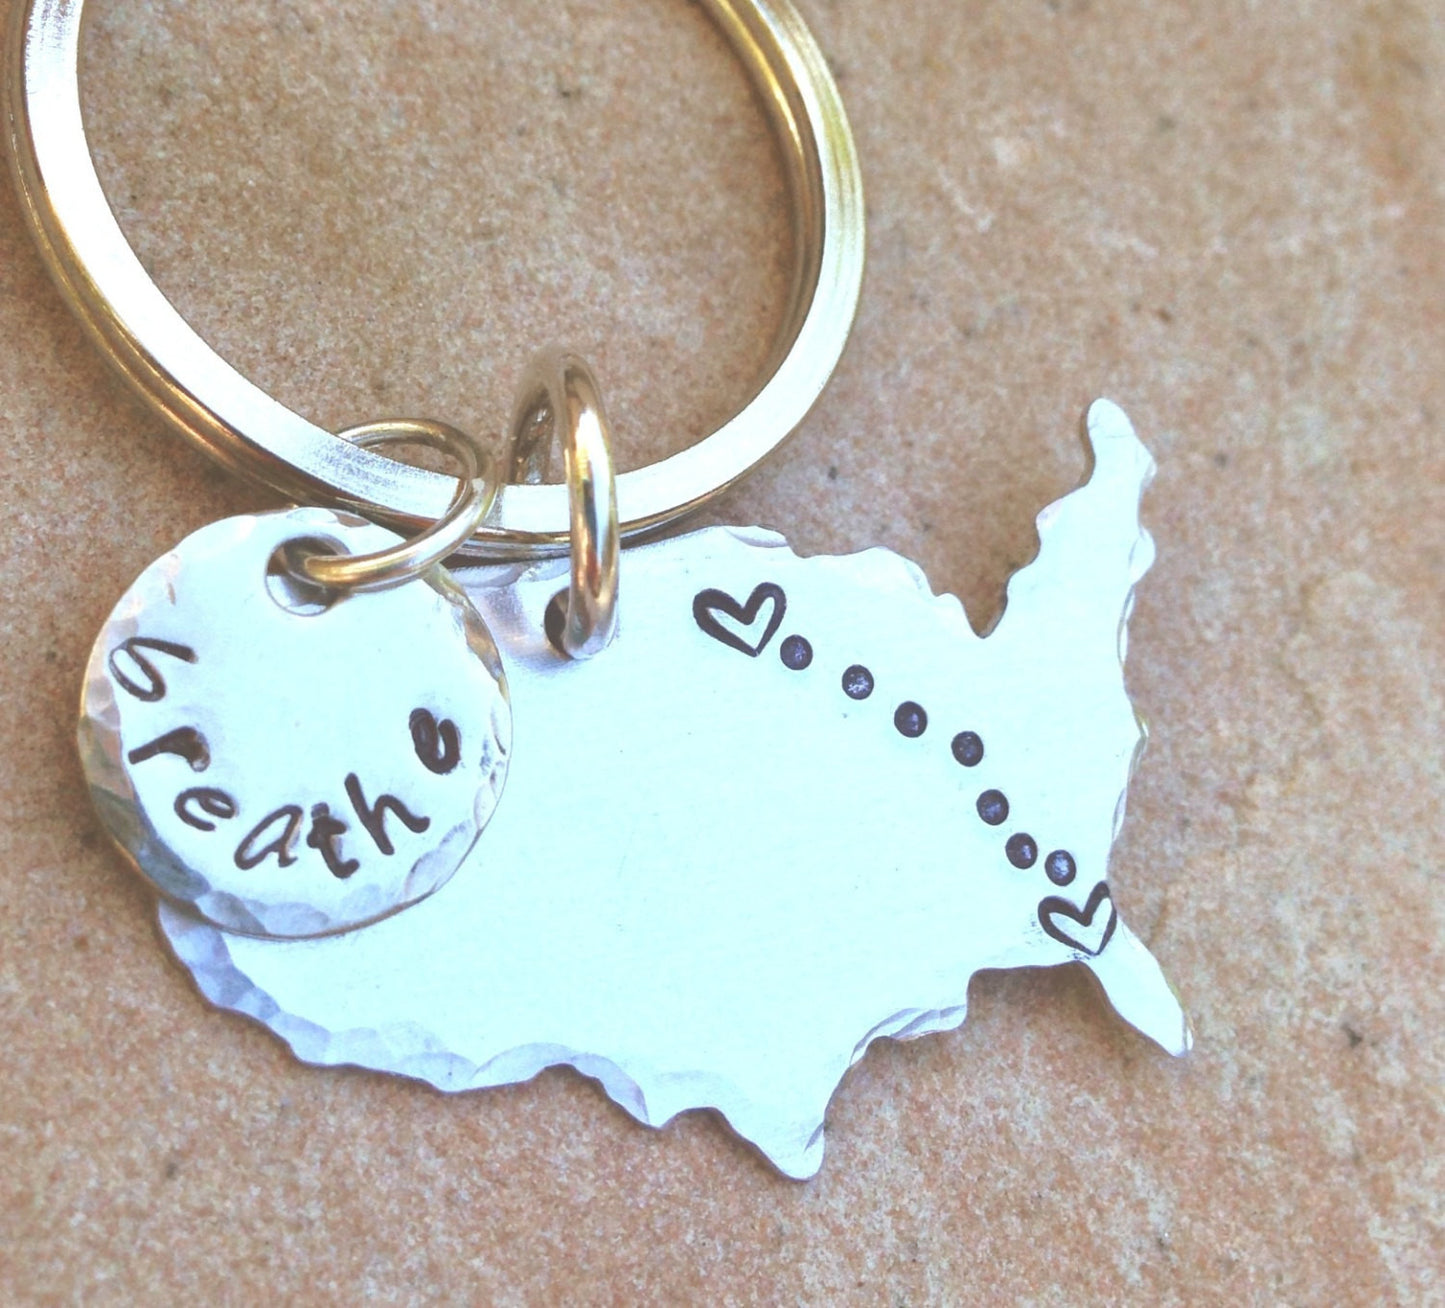 Personalized United States Keychain - Natashaaloha, jewelry, bracelets, necklace, keychains, fishing lures, gifts for men, charms, personalized, 